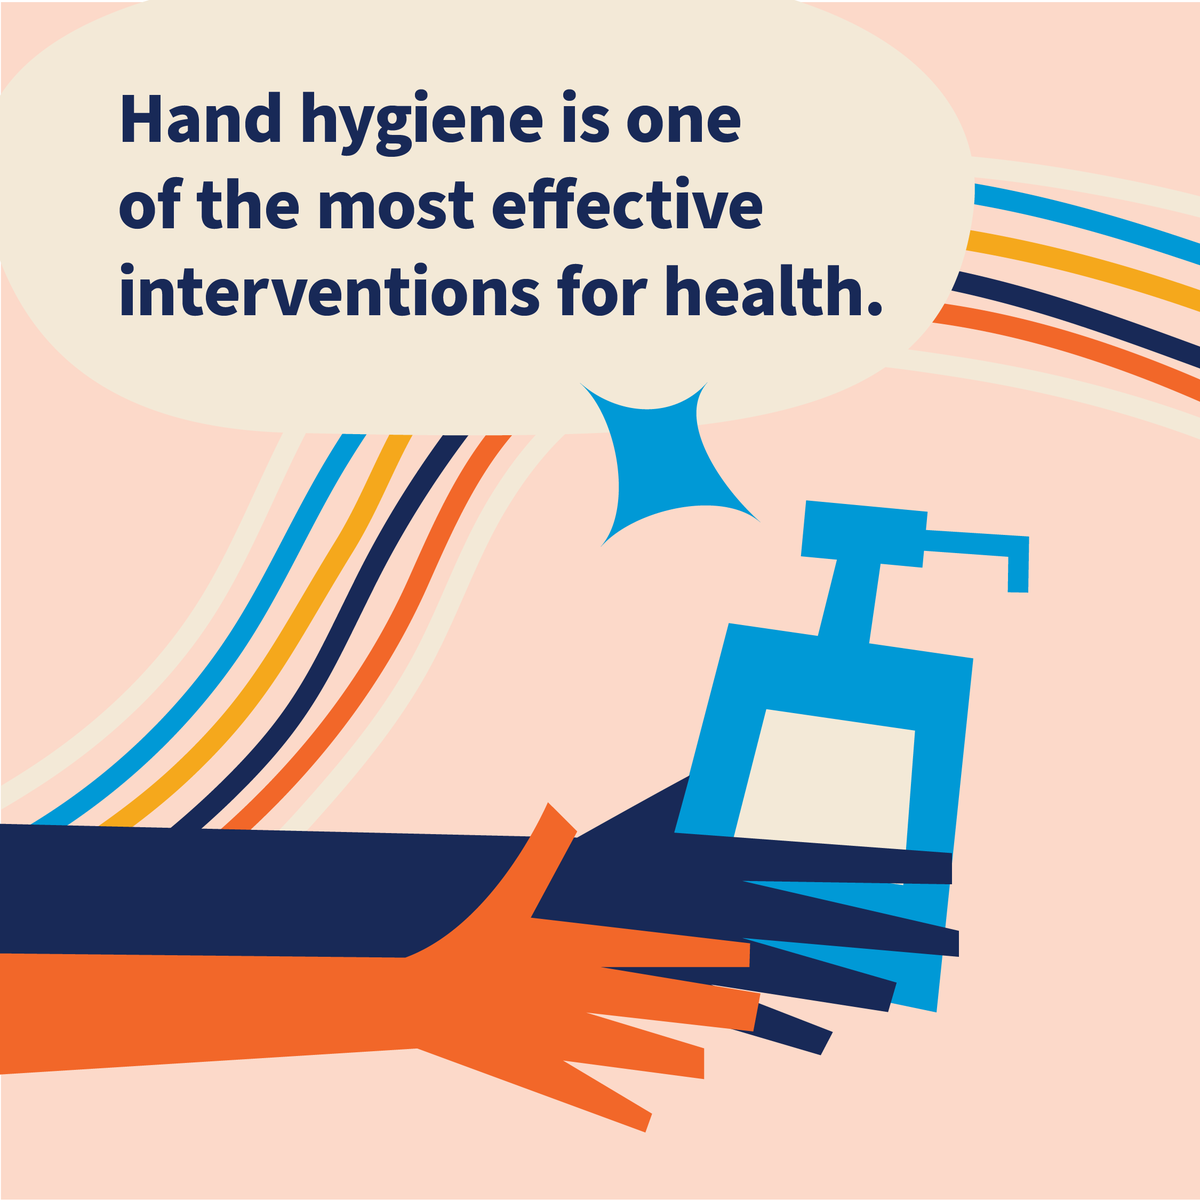 Today is World Hand Hygiene Day. Why is sharing knowledge about hand hygiene still so important? Because it saves lives and is an effective way to prevent infection. Follow @WHO or head to ow.ly/U9Kf50RqUu6 for more info. #WHHD24 #WorldHandHygieneDay